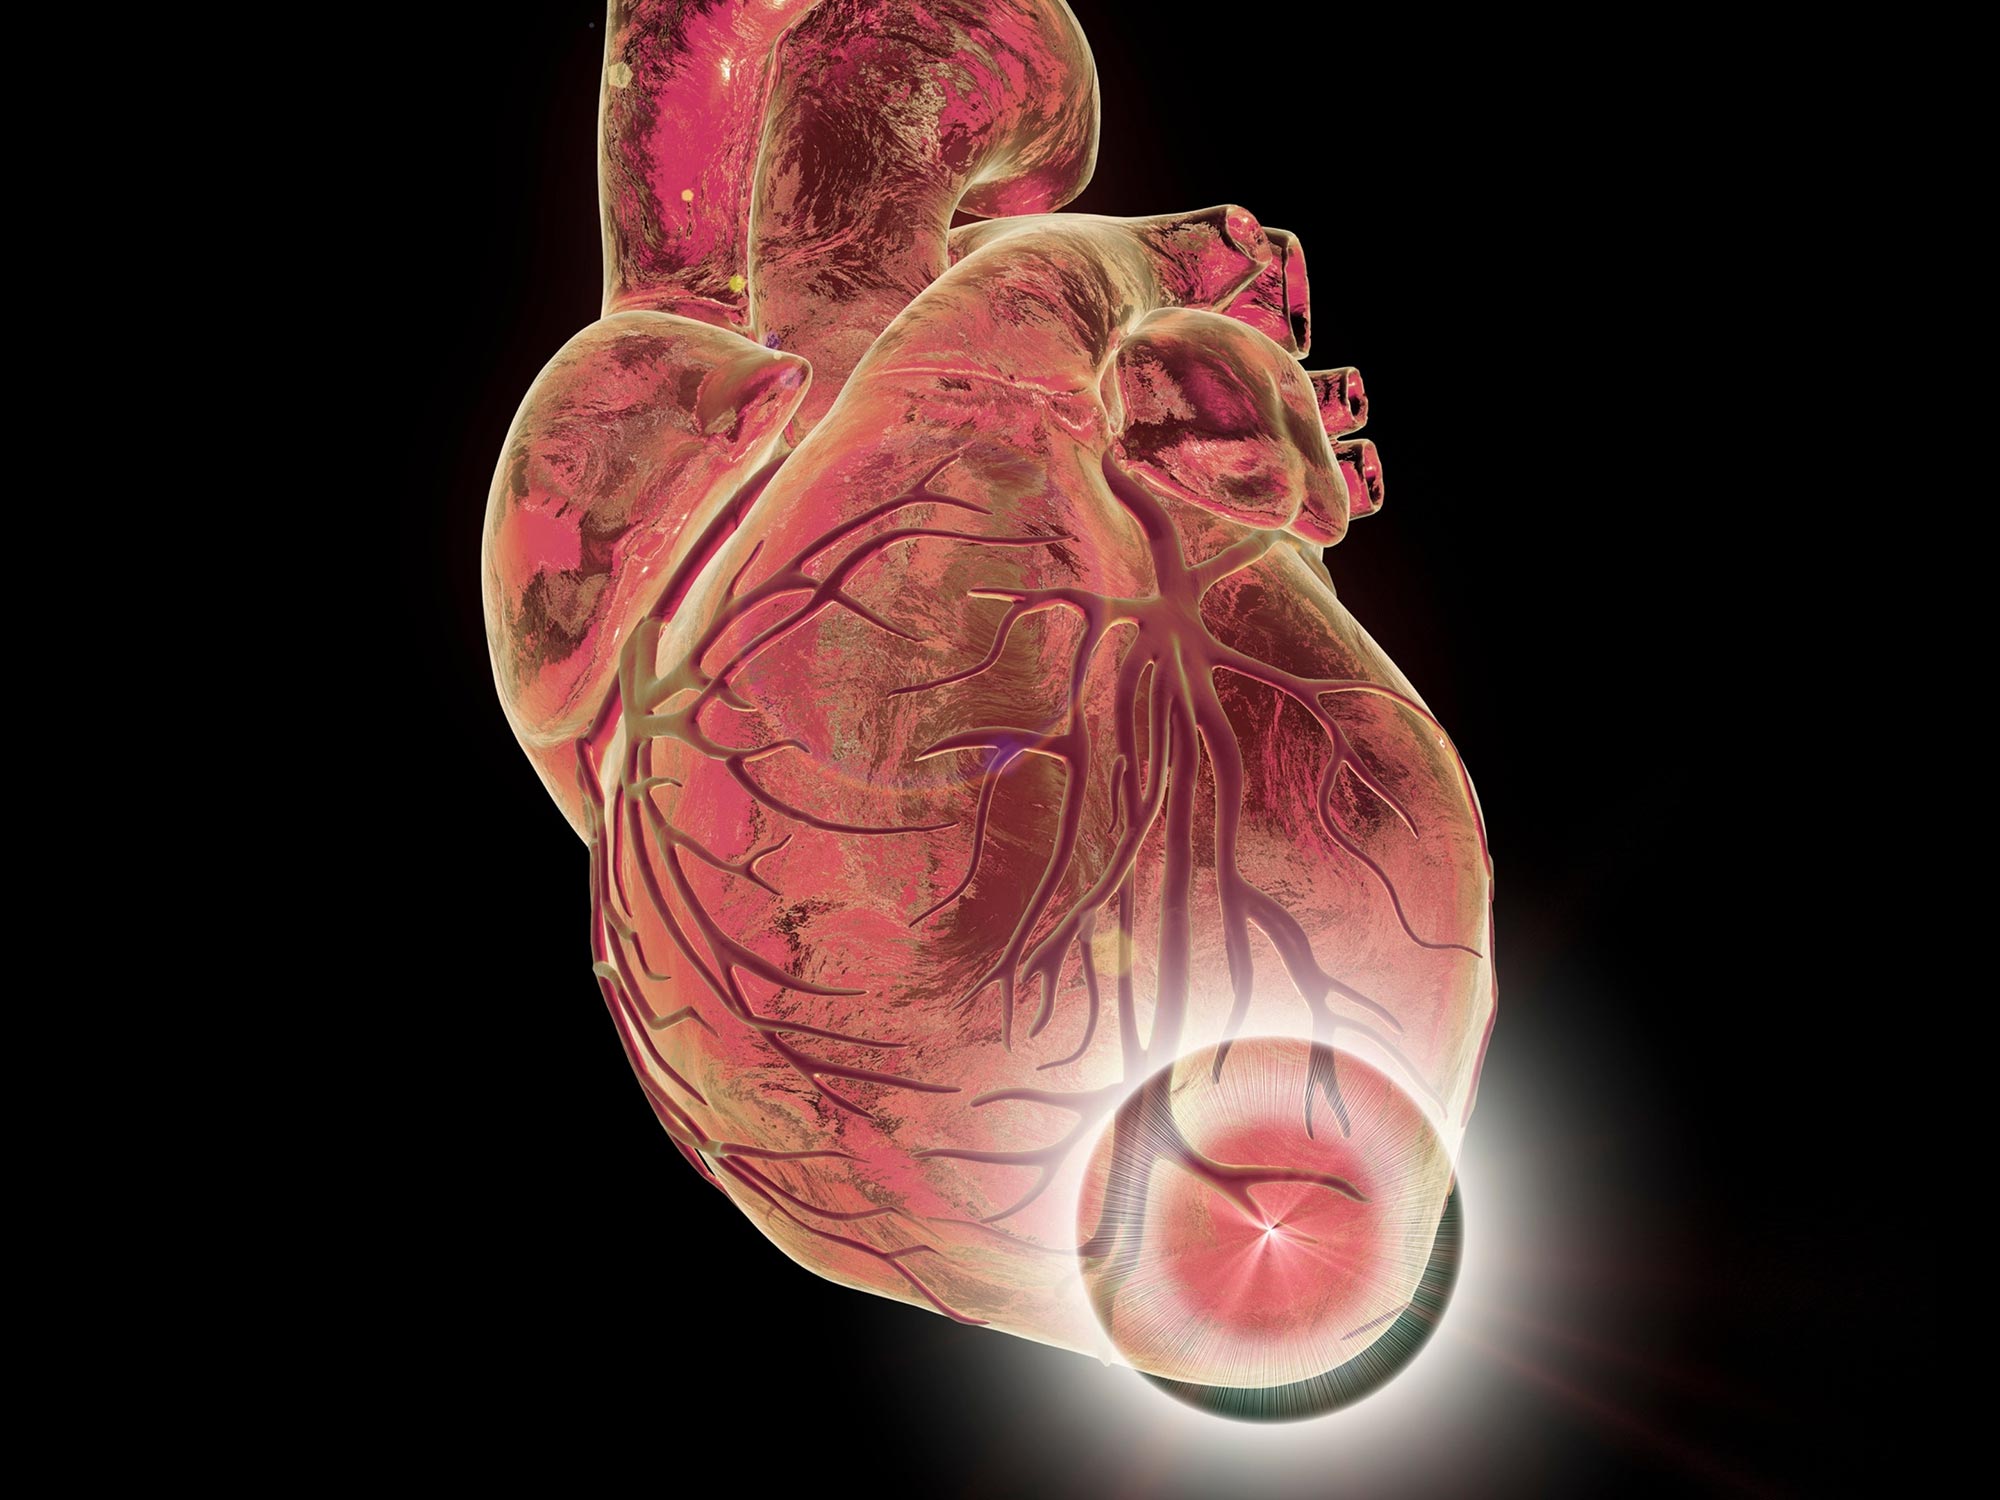 COVID-19 Infections Increase Risk of Serious Heart Conditions Up to a Year Later